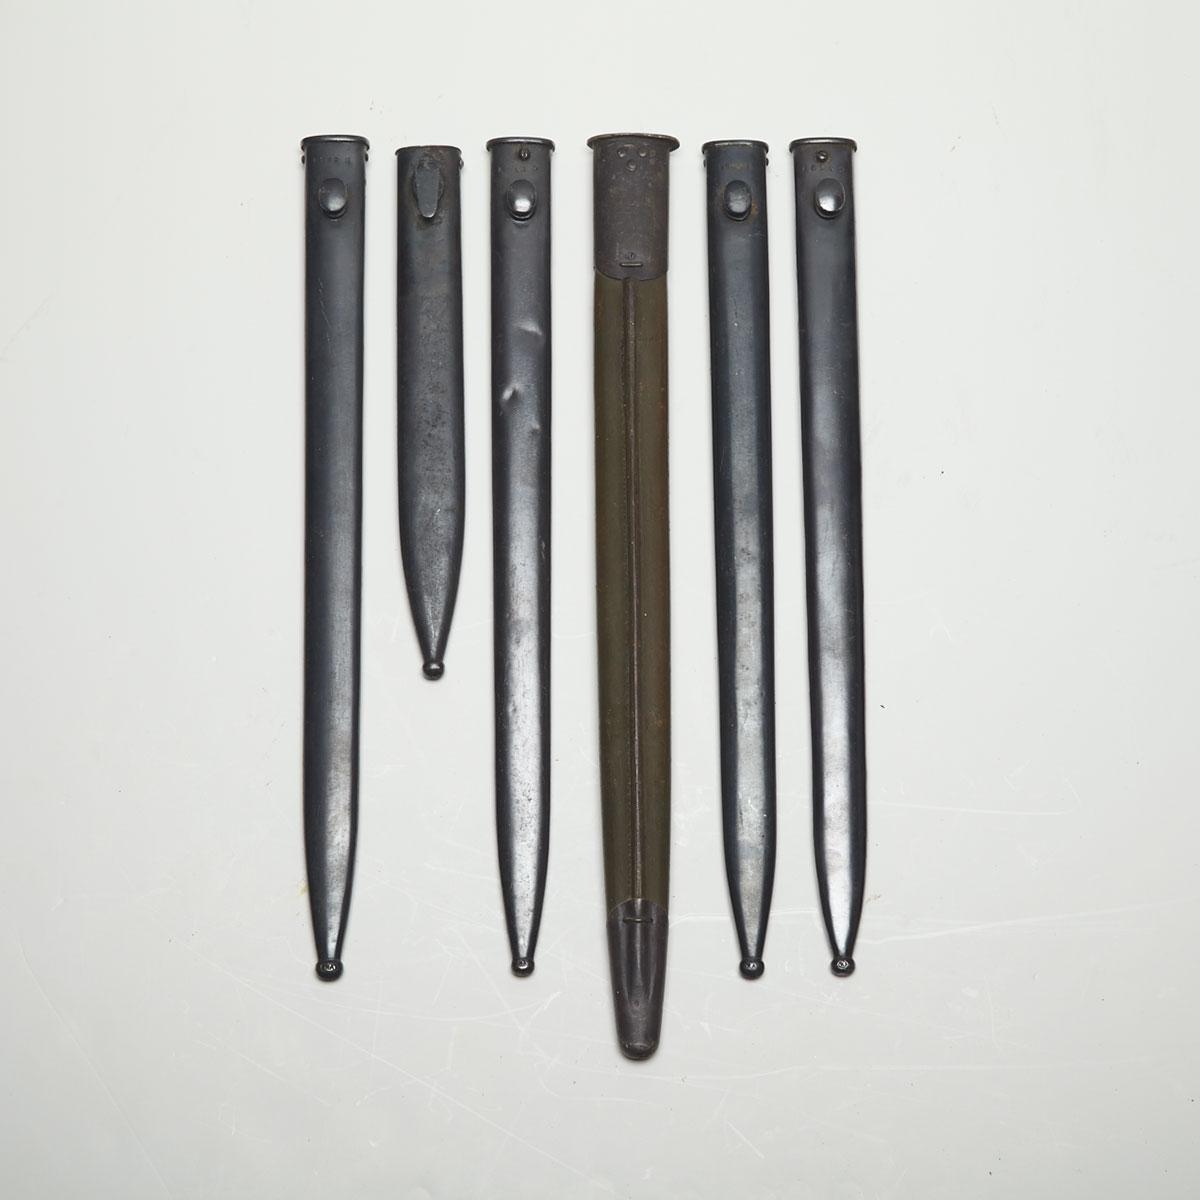 Miscellaneous Group of Six Bayonet Scabbards, 20th century